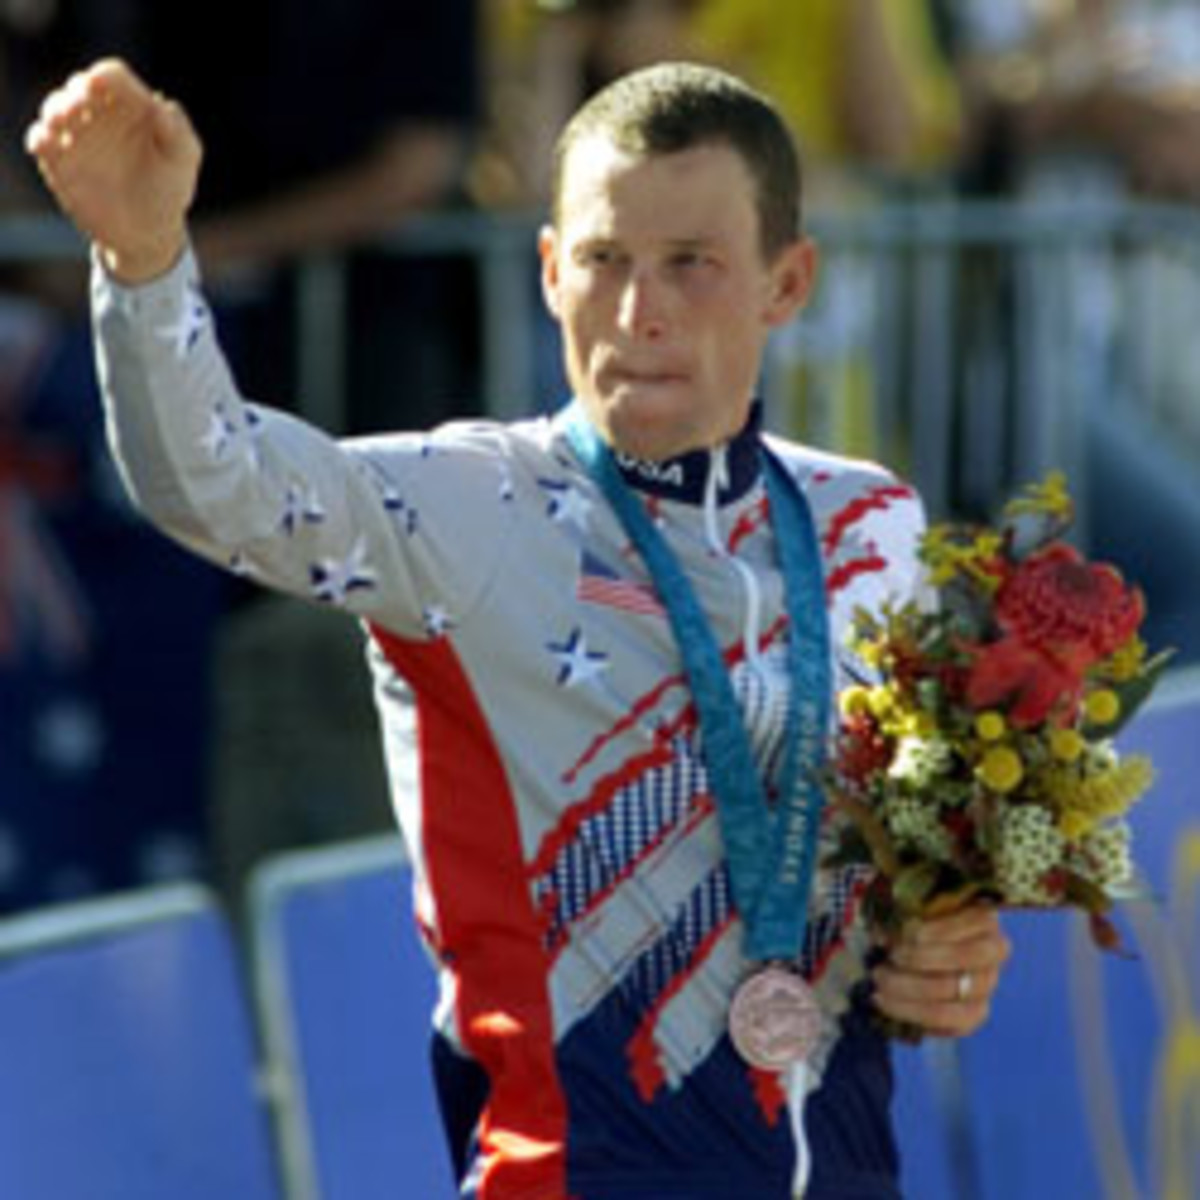 Lance Armstrong could next lose the bronze medal he won at the 2000 Sydney Olympics. (AFP/Getty Images)